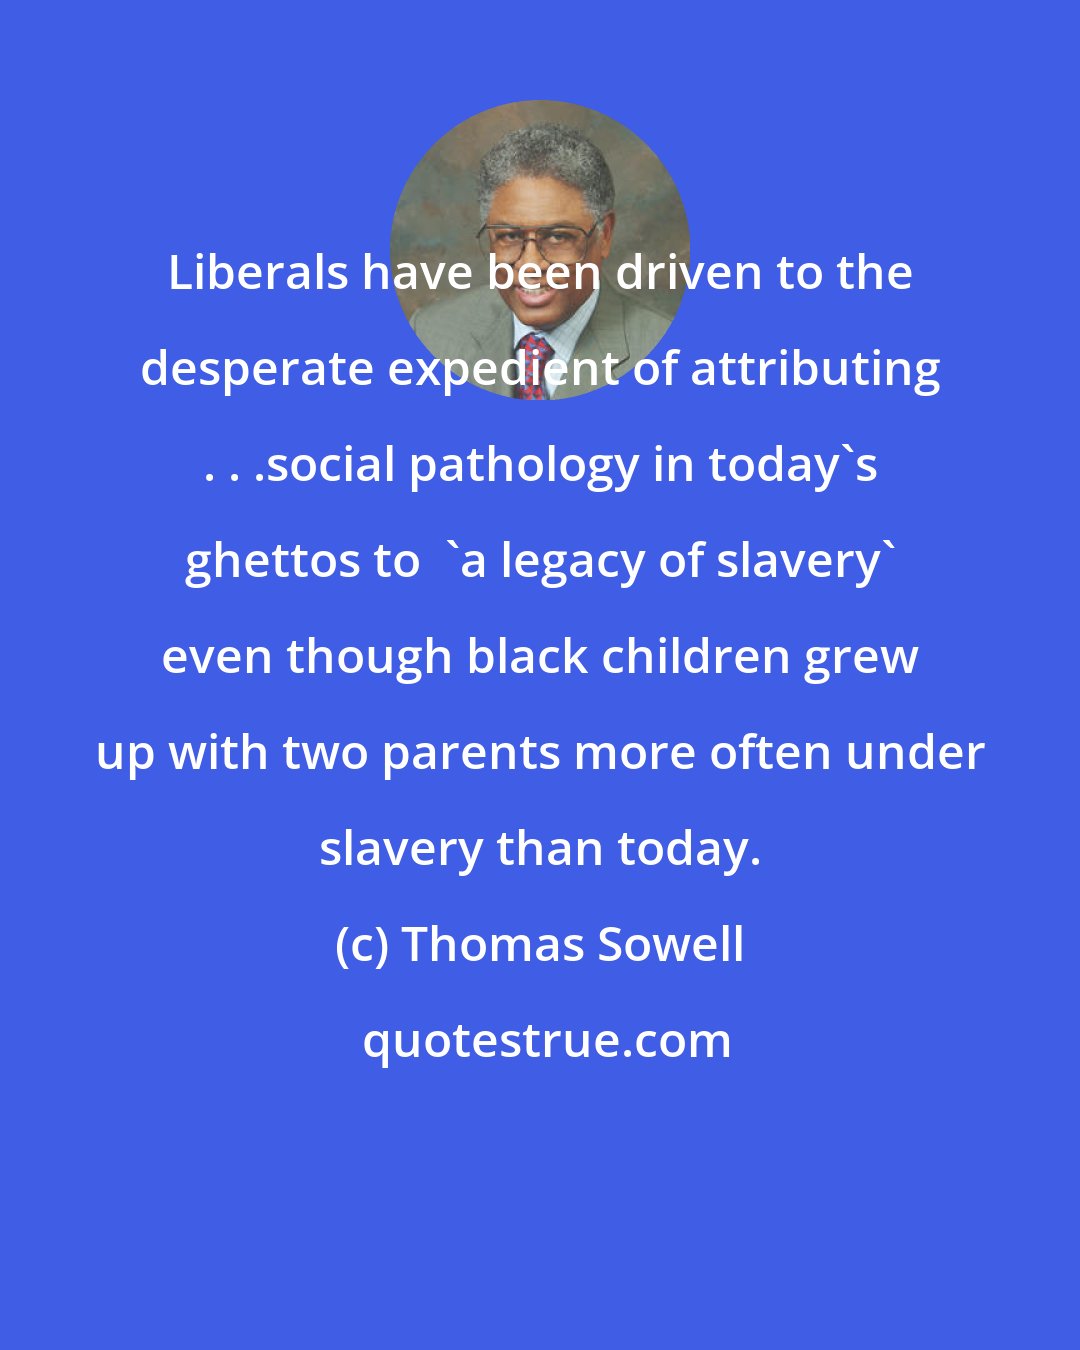 Thomas Sowell: Liberals have been driven to the desperate expedient of attributing . . .social pathology in today's ghettos to  'a legacy of slavery' even though black children grew up with two parents more often under slavery than today.